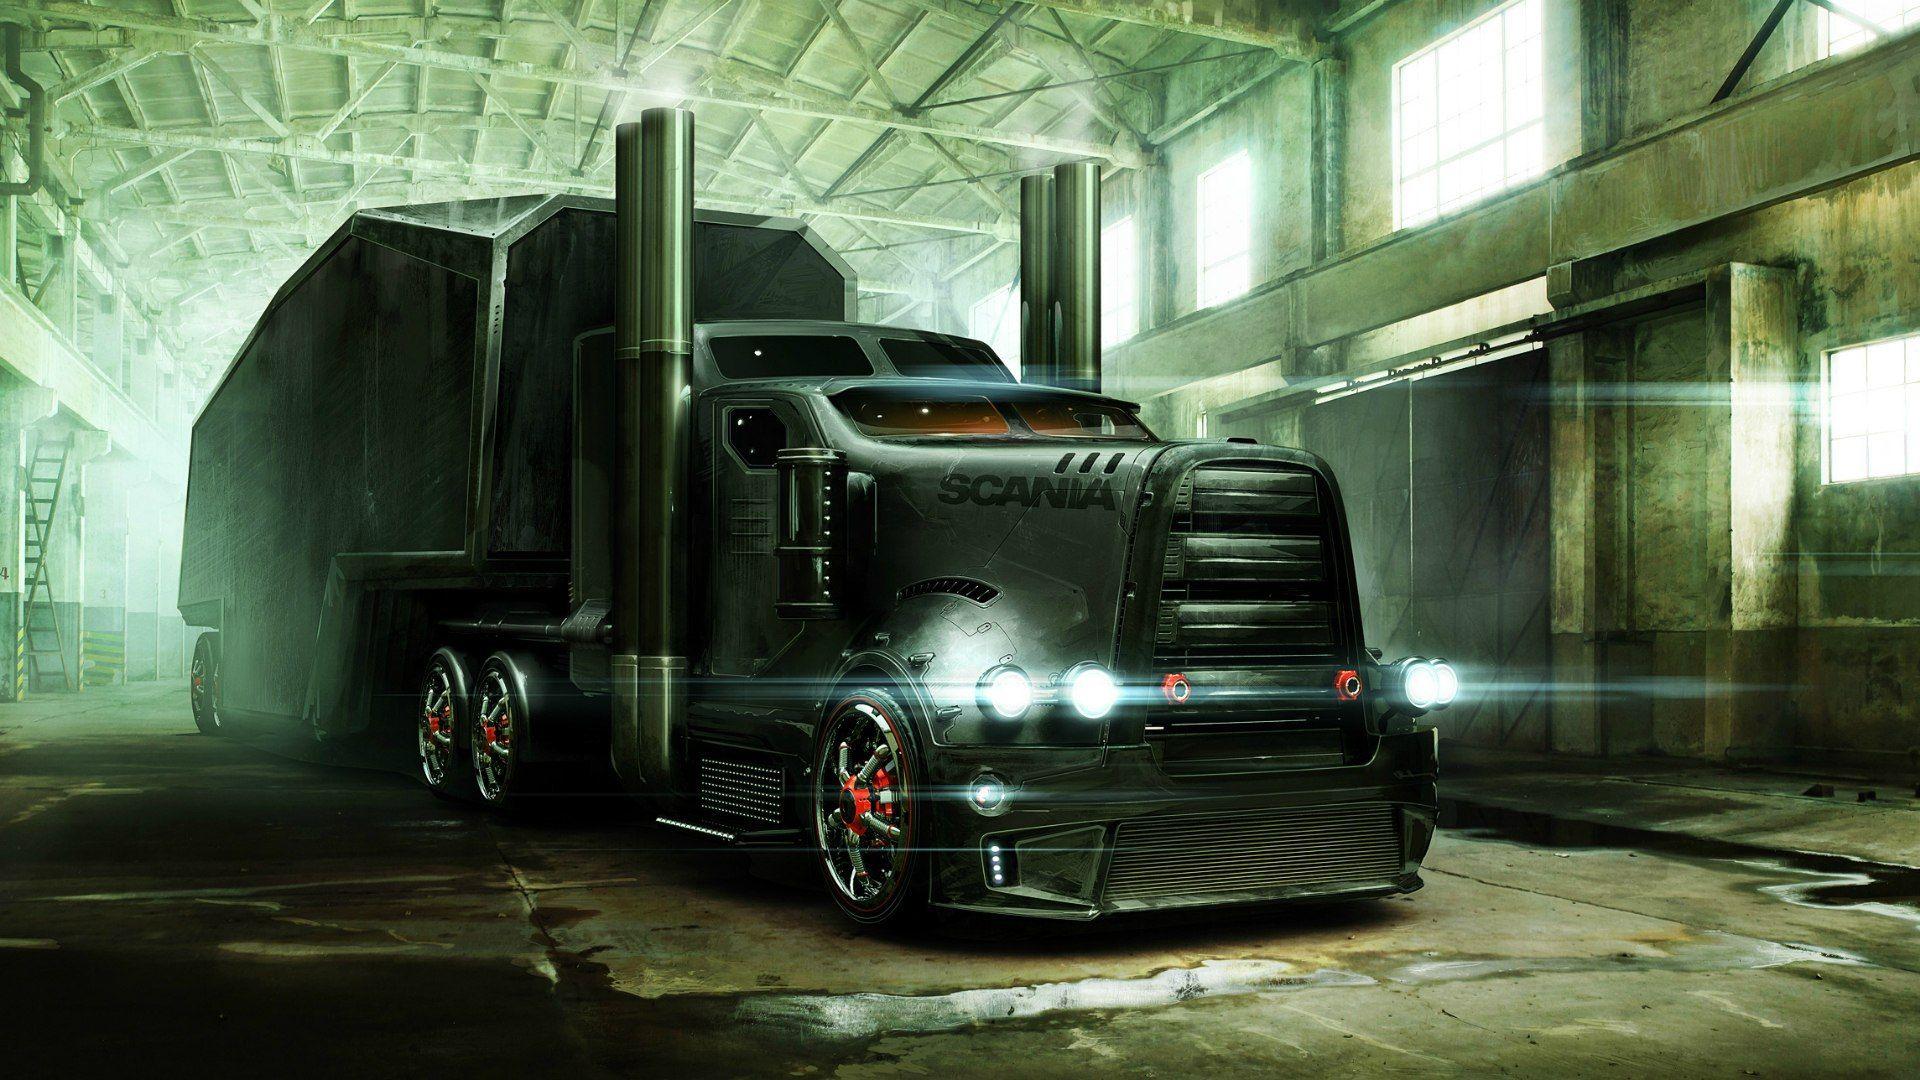 Was searching for a cool truck wallpaper and came across this beaut. Anyone know if it exists as a mod for ETS2 or ATS? I really, really hope so